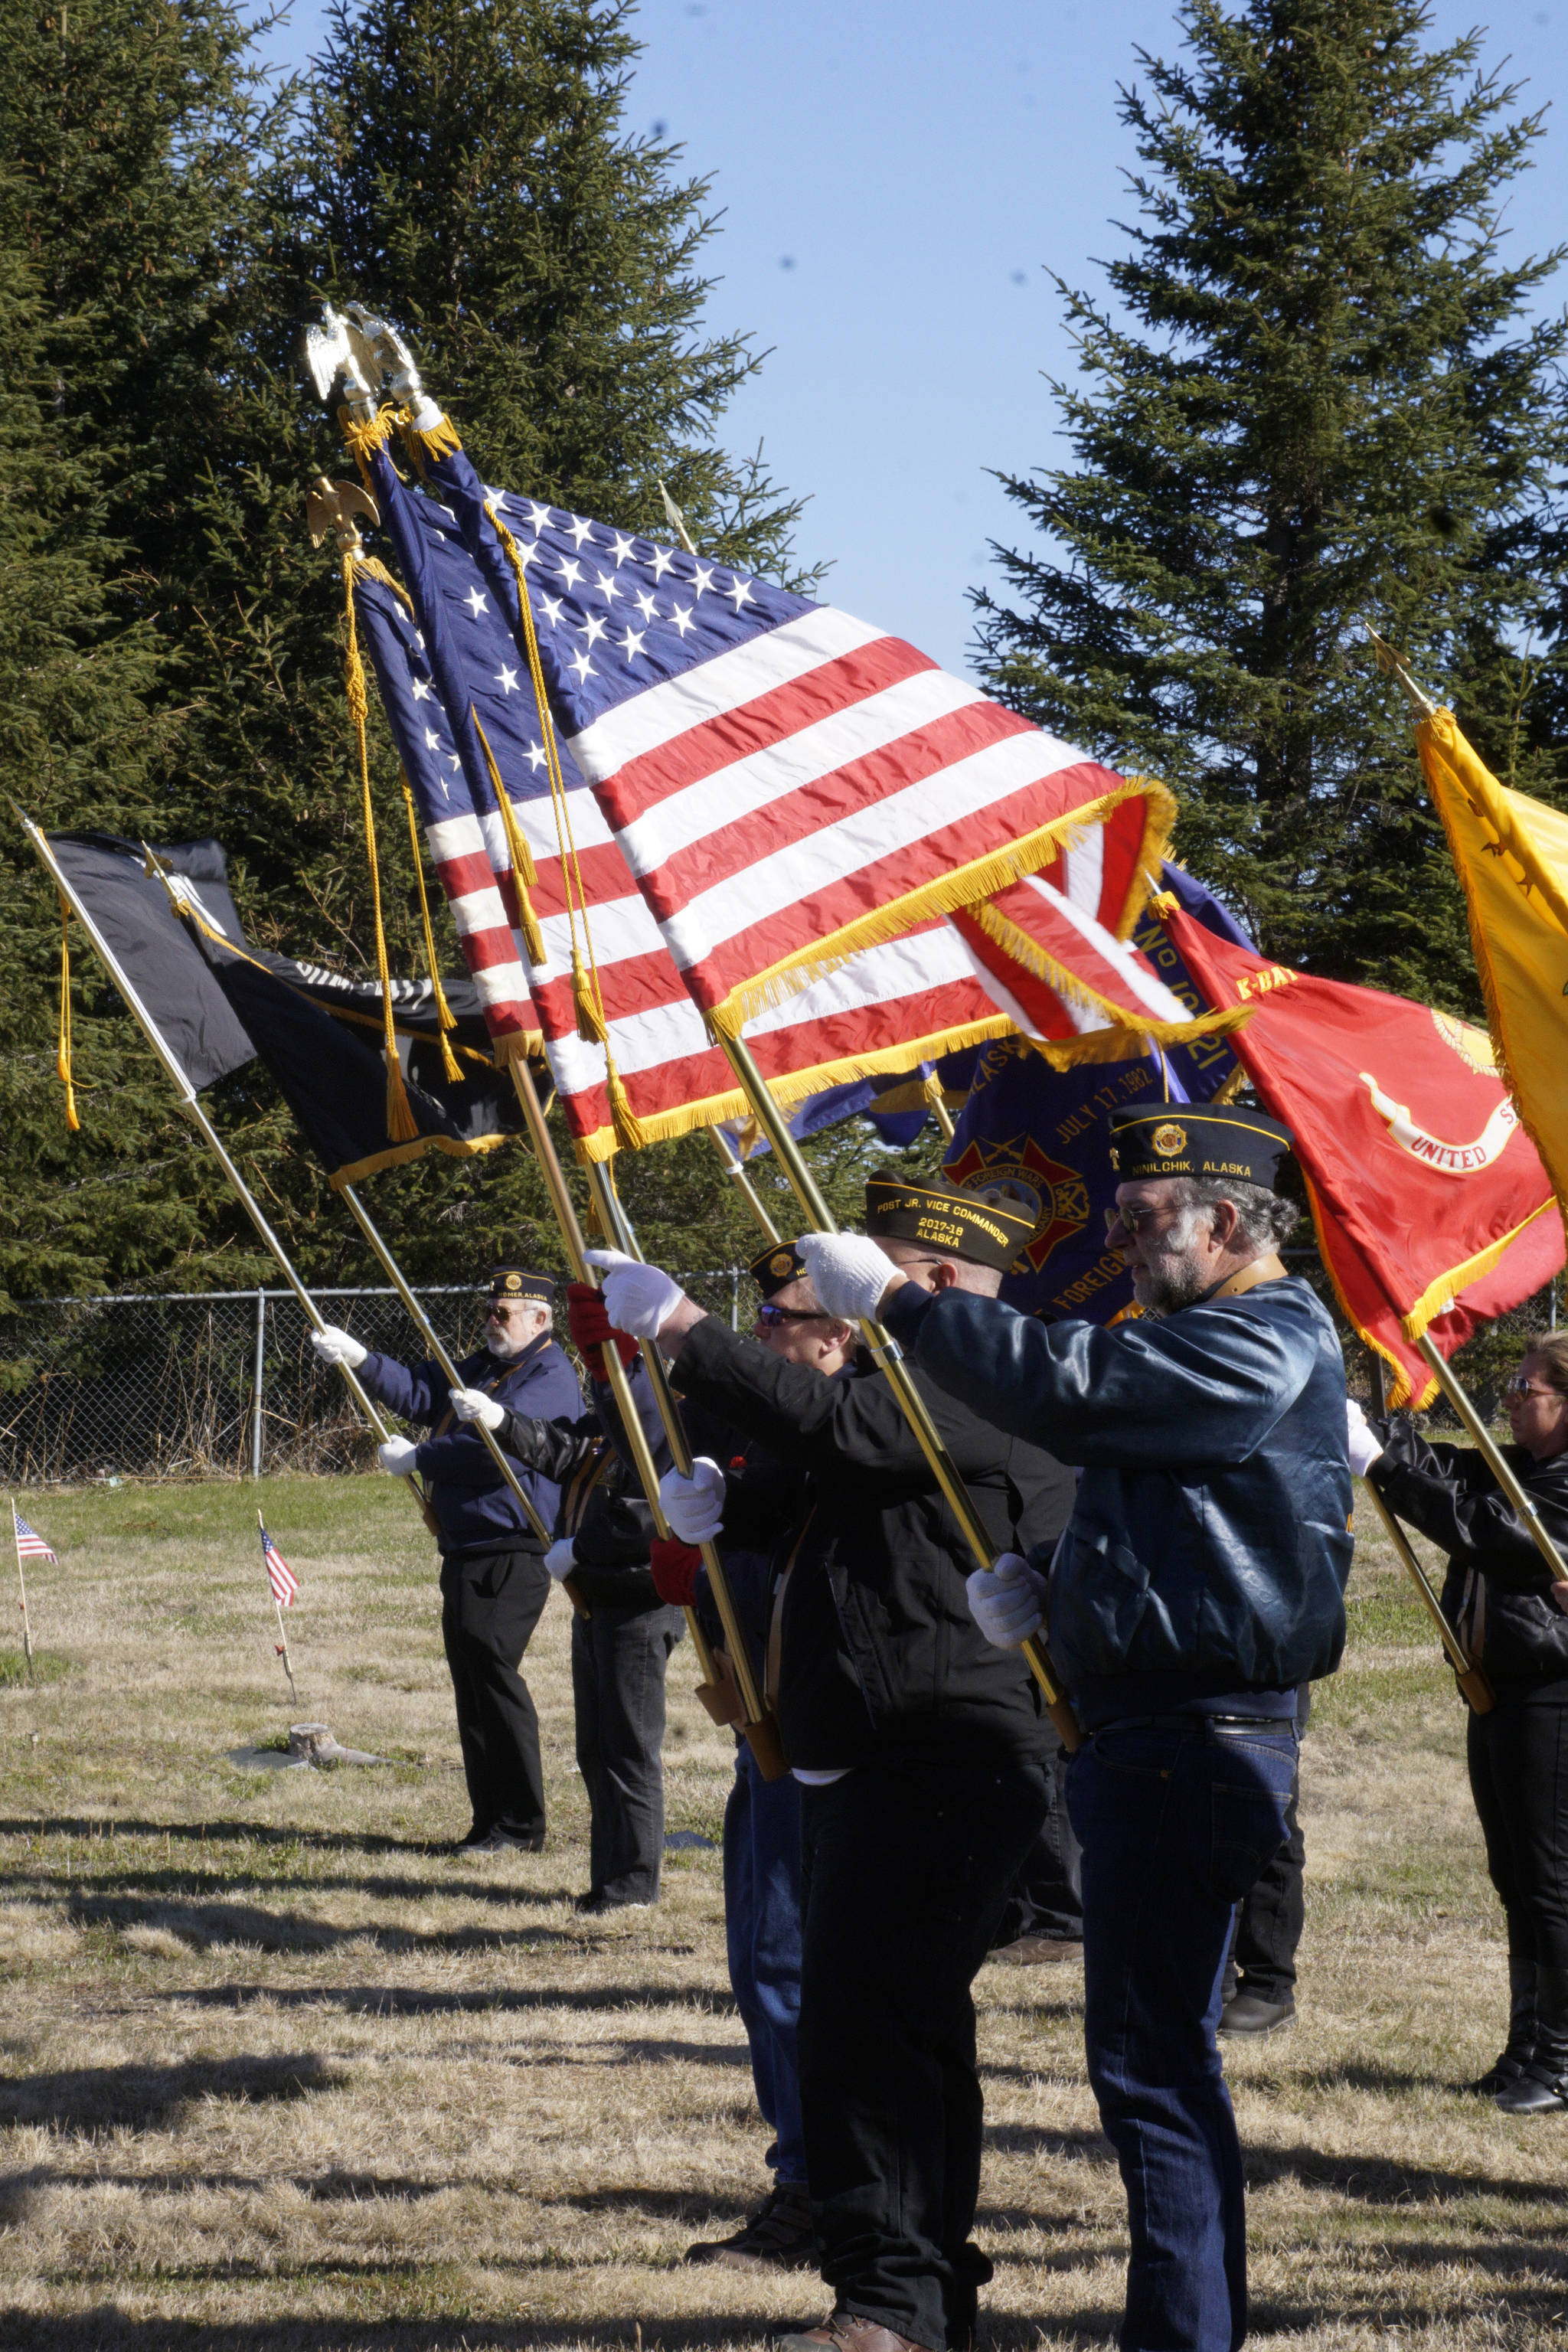 Members of the American Legion and the Veterans of Foreign Wars hold flags on Memorial Day, May 28, 2018, at Hickerson Memorial Cemetery, Homer, for services there. (Photo by Michael Armstrong / Homer News)